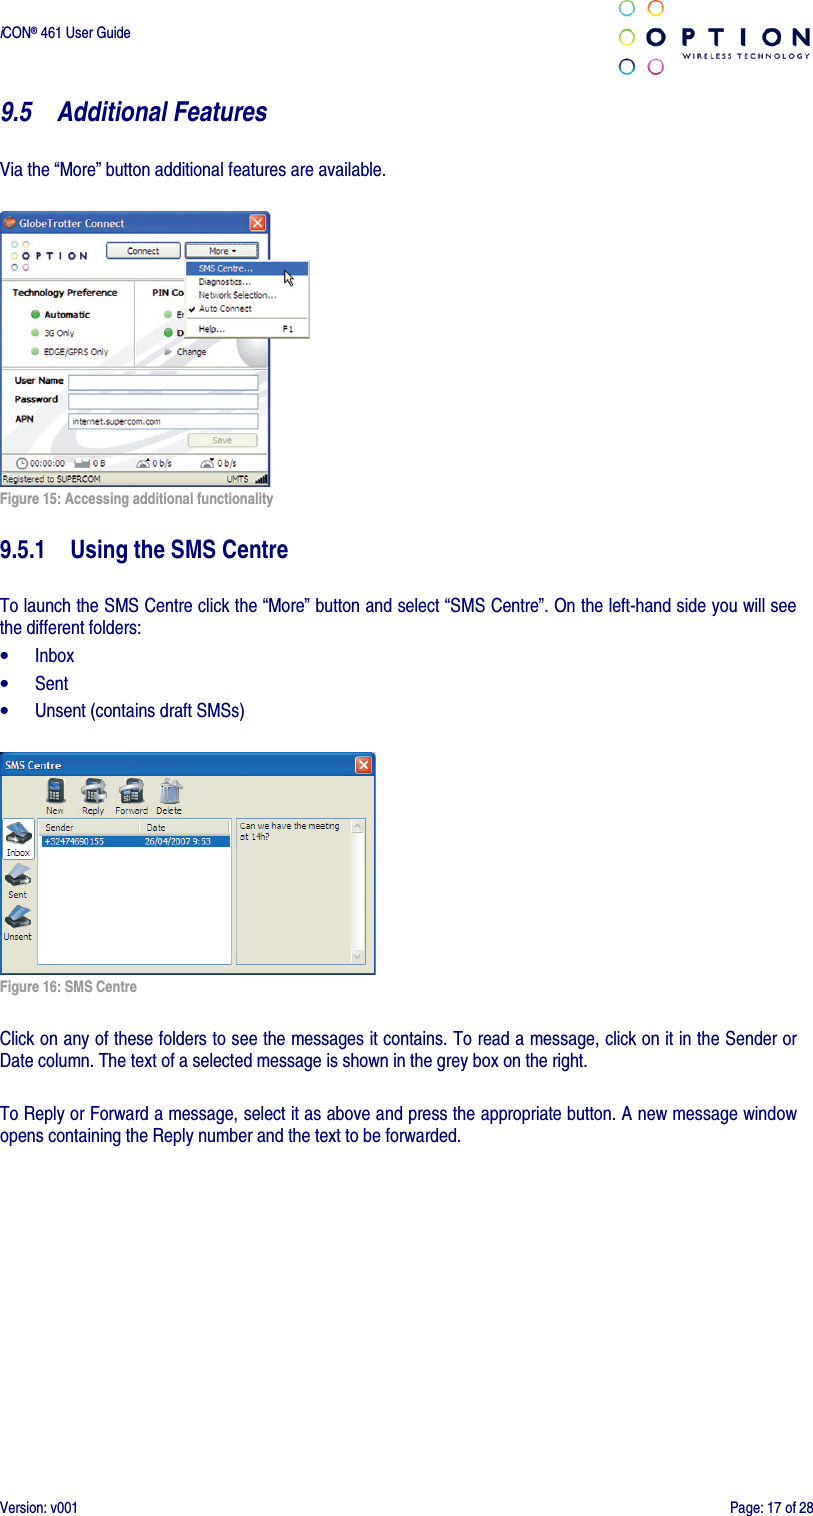  iCON® 461 User Guide     Version: v001  Page: 17 of 28 9.5 Additional Features  Via the “More” button additional features are available.   Figure 15: Accessing additional functionality  9.5.1 Using the SMS Centre  To launch the SMS Centre click the “More” button and select “SMS Centre”. On the left-hand side you will see the different folders: • Inbox • Sent • Unsent (contains draft SMSs)   Figure 16: SMS Centre  Click on any of these folders to see the messages it contains. To read a message, click on it in the Sender or Date column. The text of a selected message is shown in the grey box on the right.  To Reply or Forward a message, select it as above and press the appropriate button. A new message window opens containing the Reply number and the text to be forwarded. 